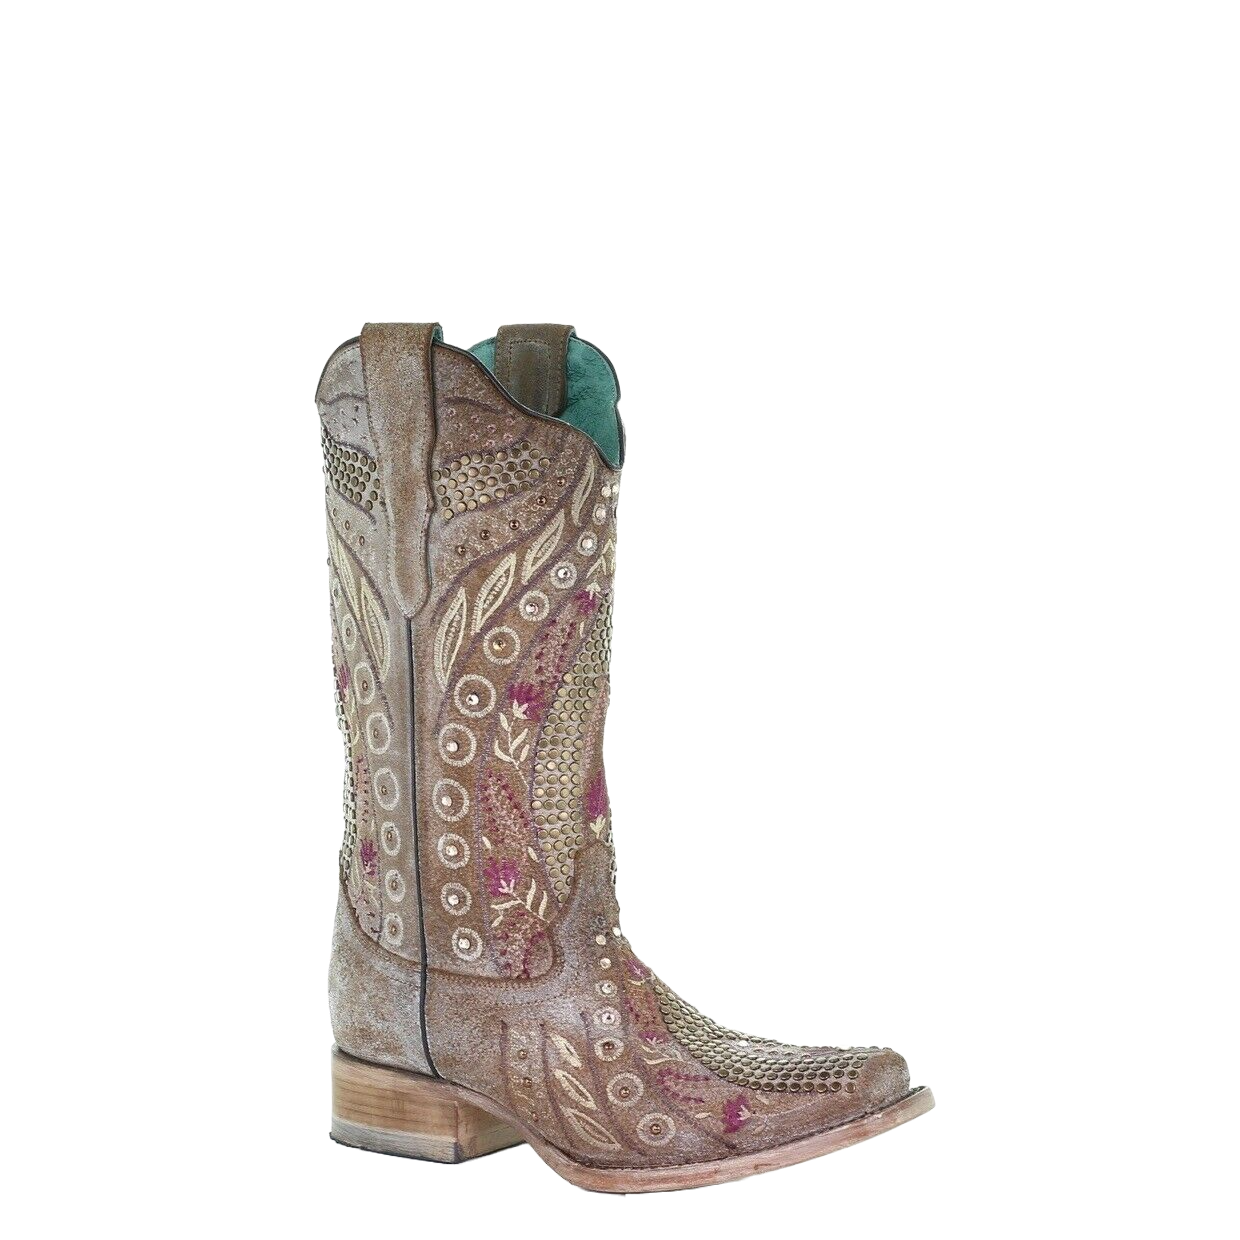 Corral Ladies Taupe Flowered Embroidery & Crystal Studs Boots E1520